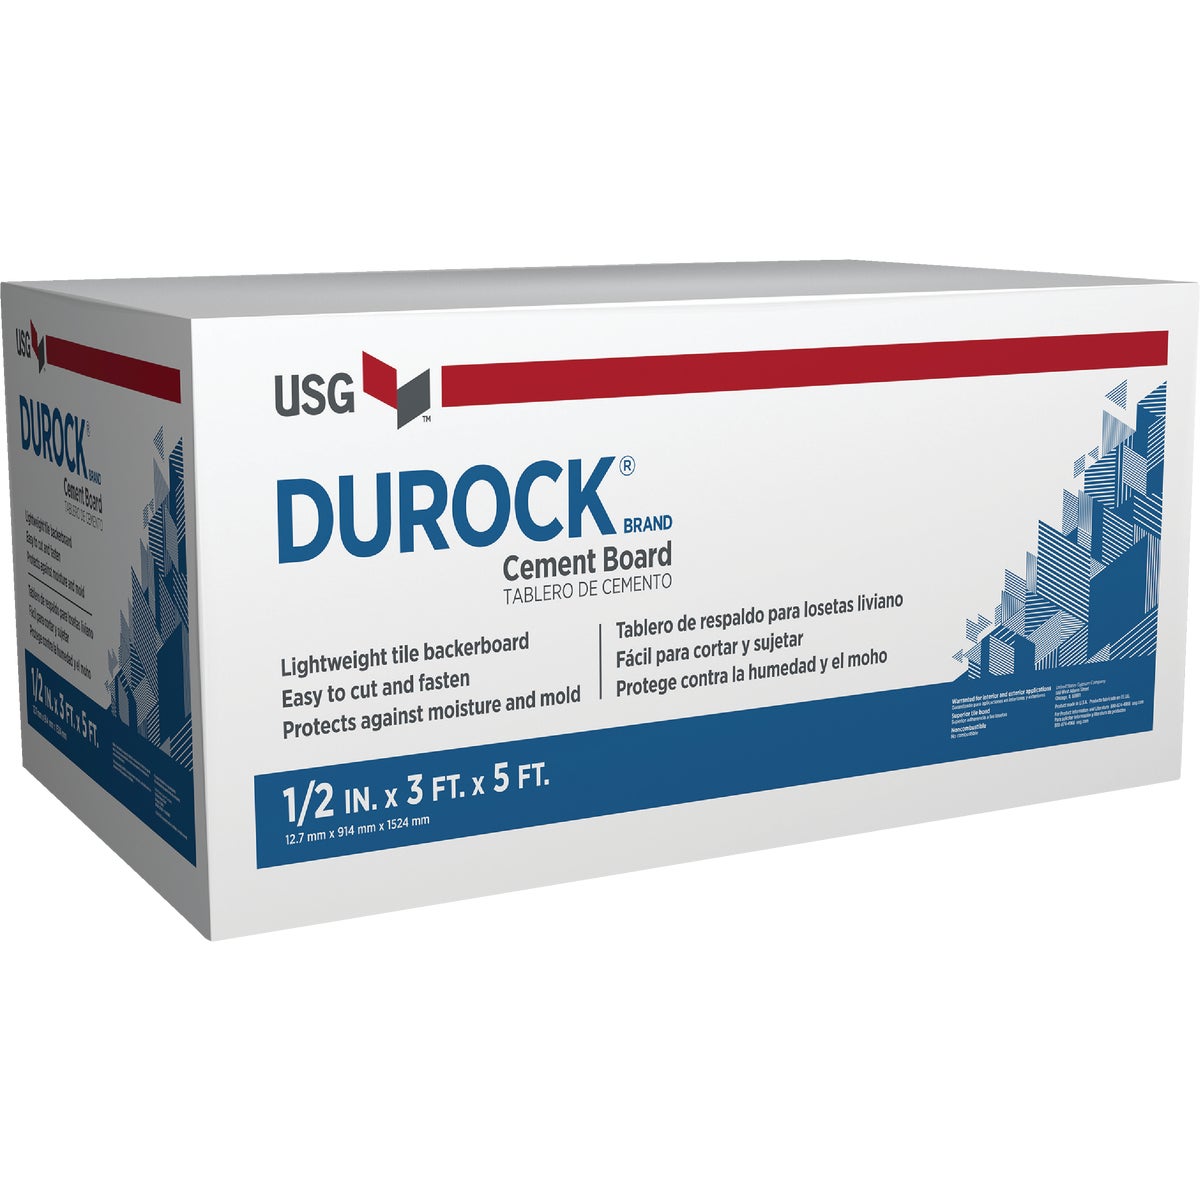 Durock 1/2 In. x 3 Ft. x 5 Ft. Interior/Exterior Cement Board